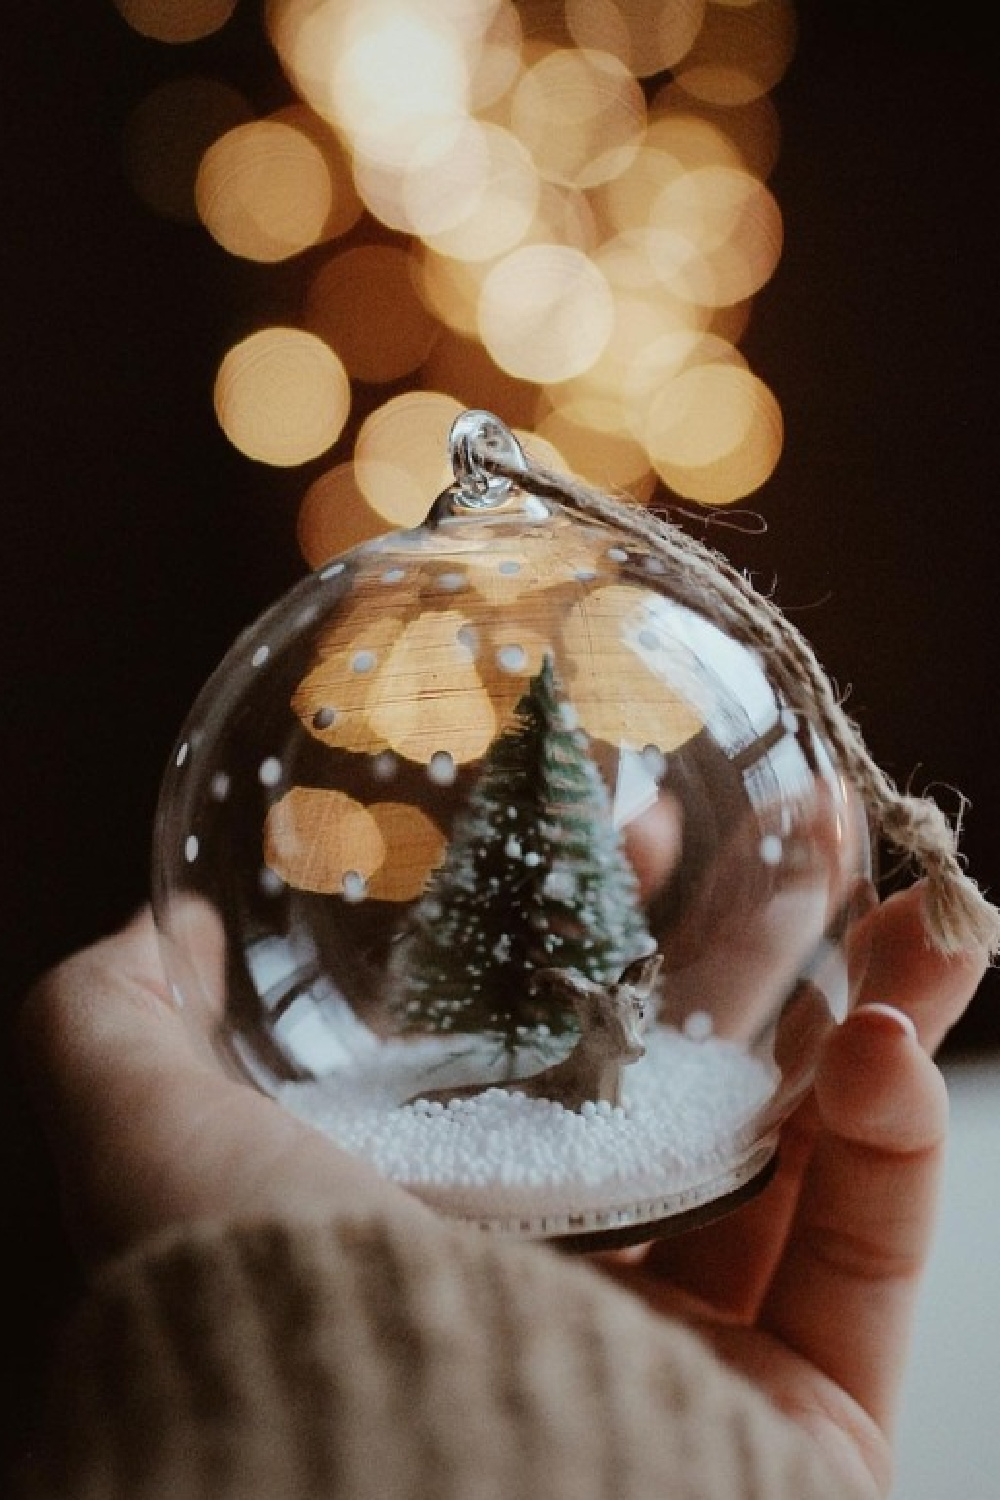 Cozy Christmas image with hand holding small snow globe with tiny tree @ChristmasXmas. #cozychristmas #snowglobes #wintervibes